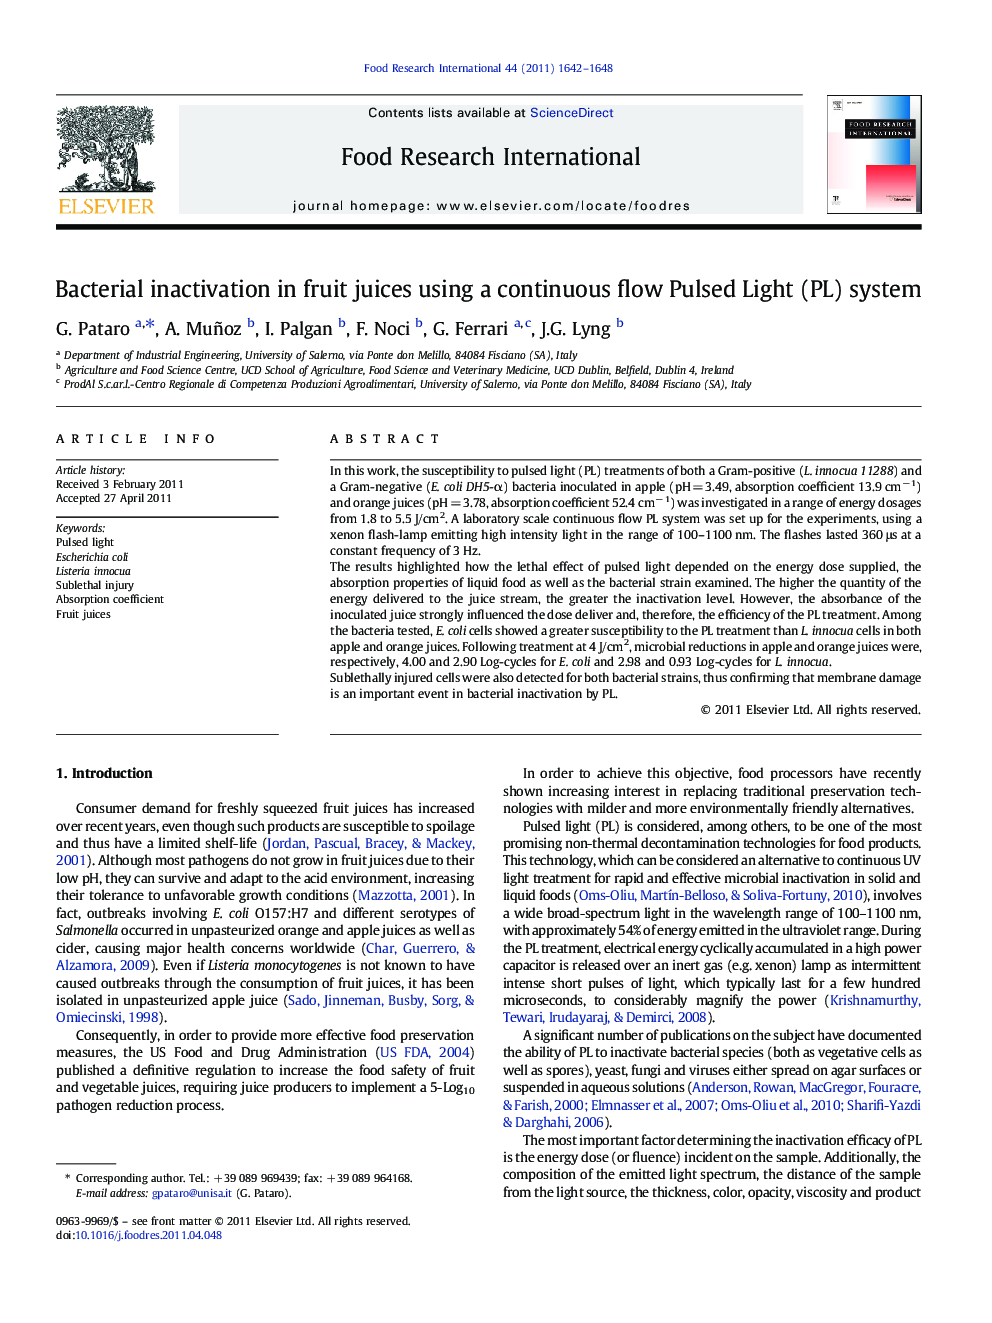 Bacterial inactivation in fruit juices using a continuous flow Pulsed Light (PL) system